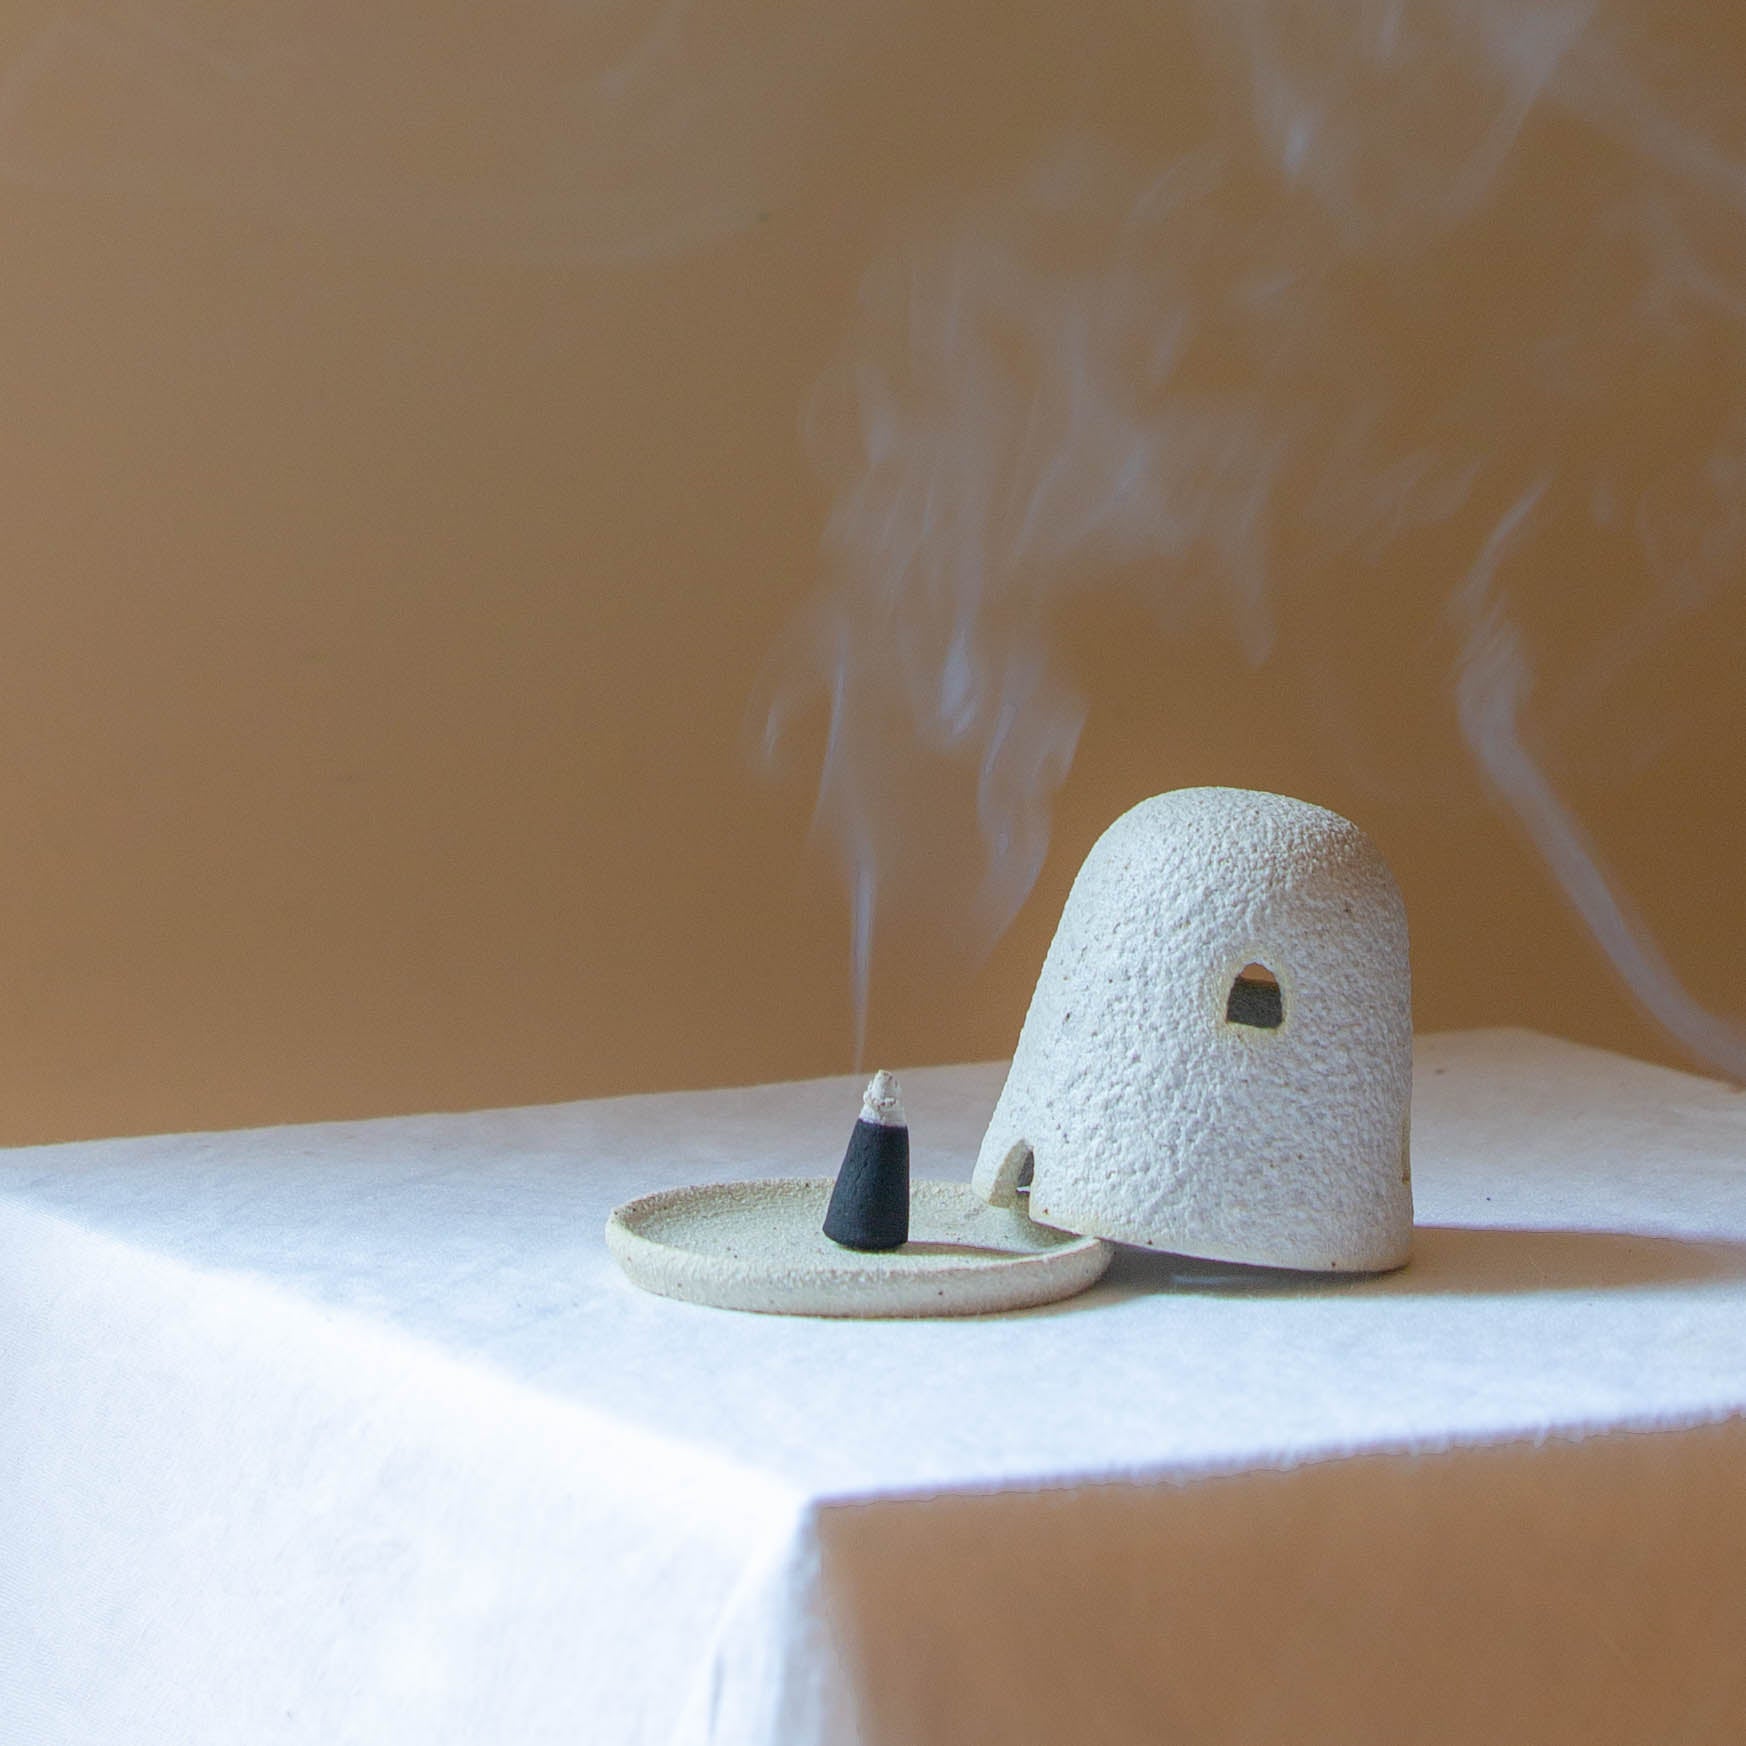 A Dome Burner in lunar glaze sitting on a white plinth with a lit incense cone which is billowing smoke. The dome burner has a smooth dome top with hand carved windows and sits on a dish.